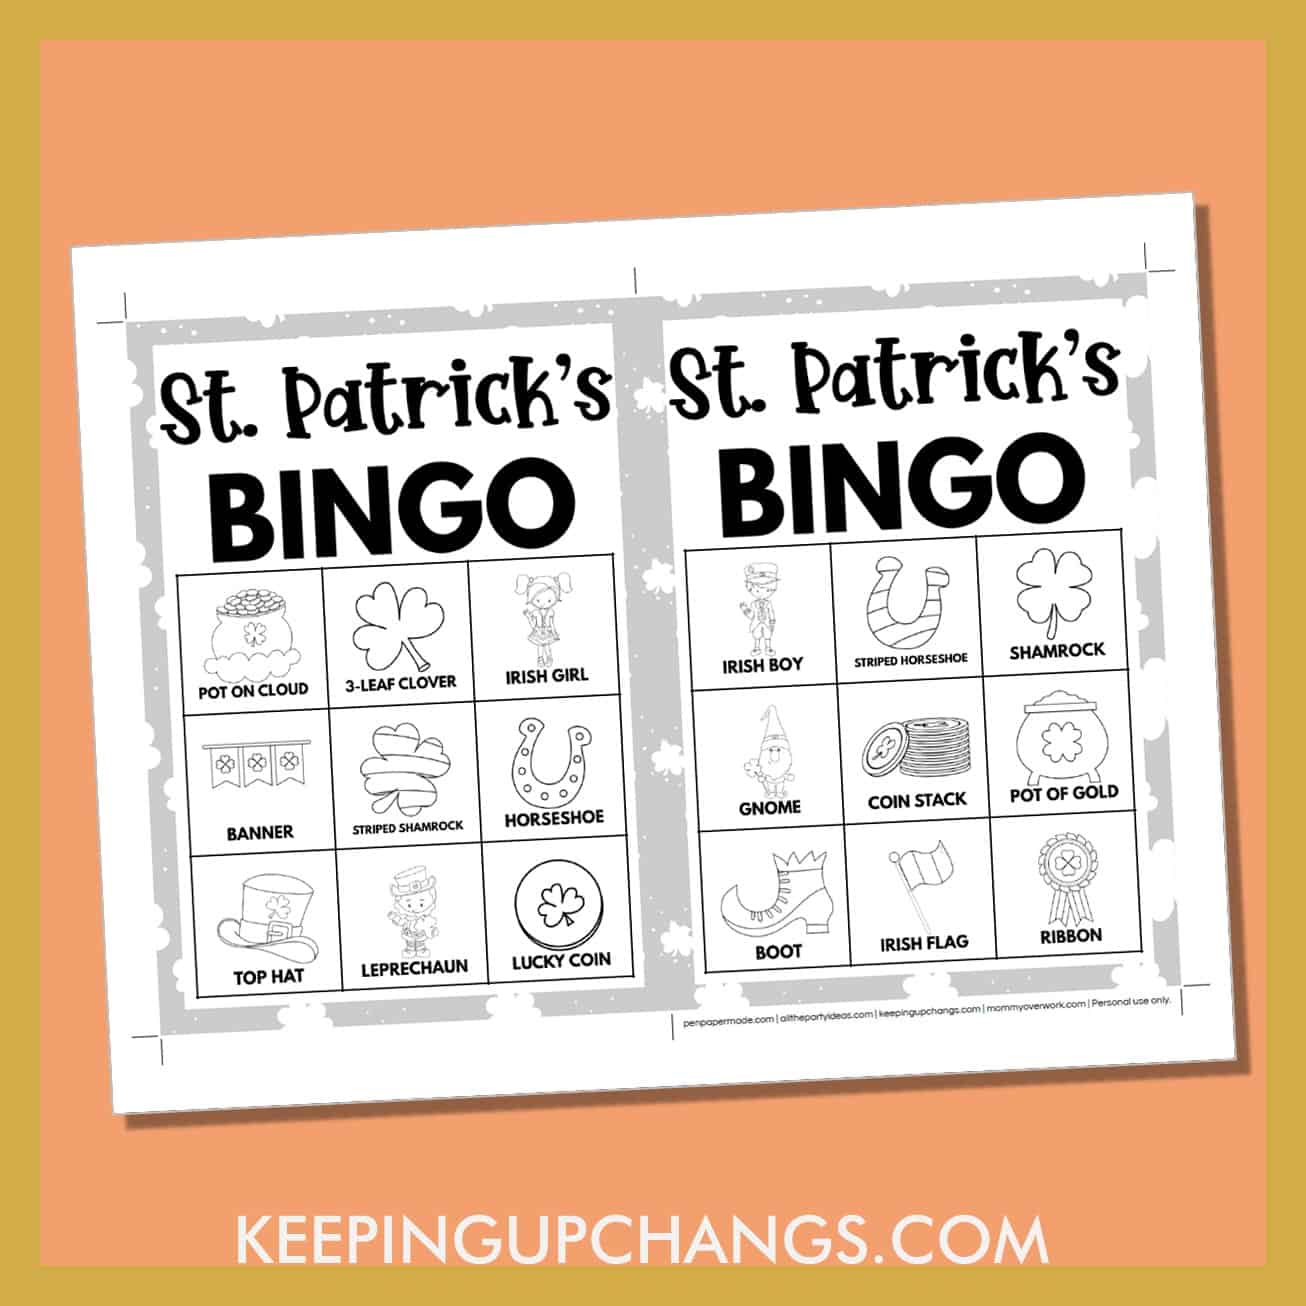 free st patrick's day bingo card 3x3 5x7 black white coloring game boards with images and text words.